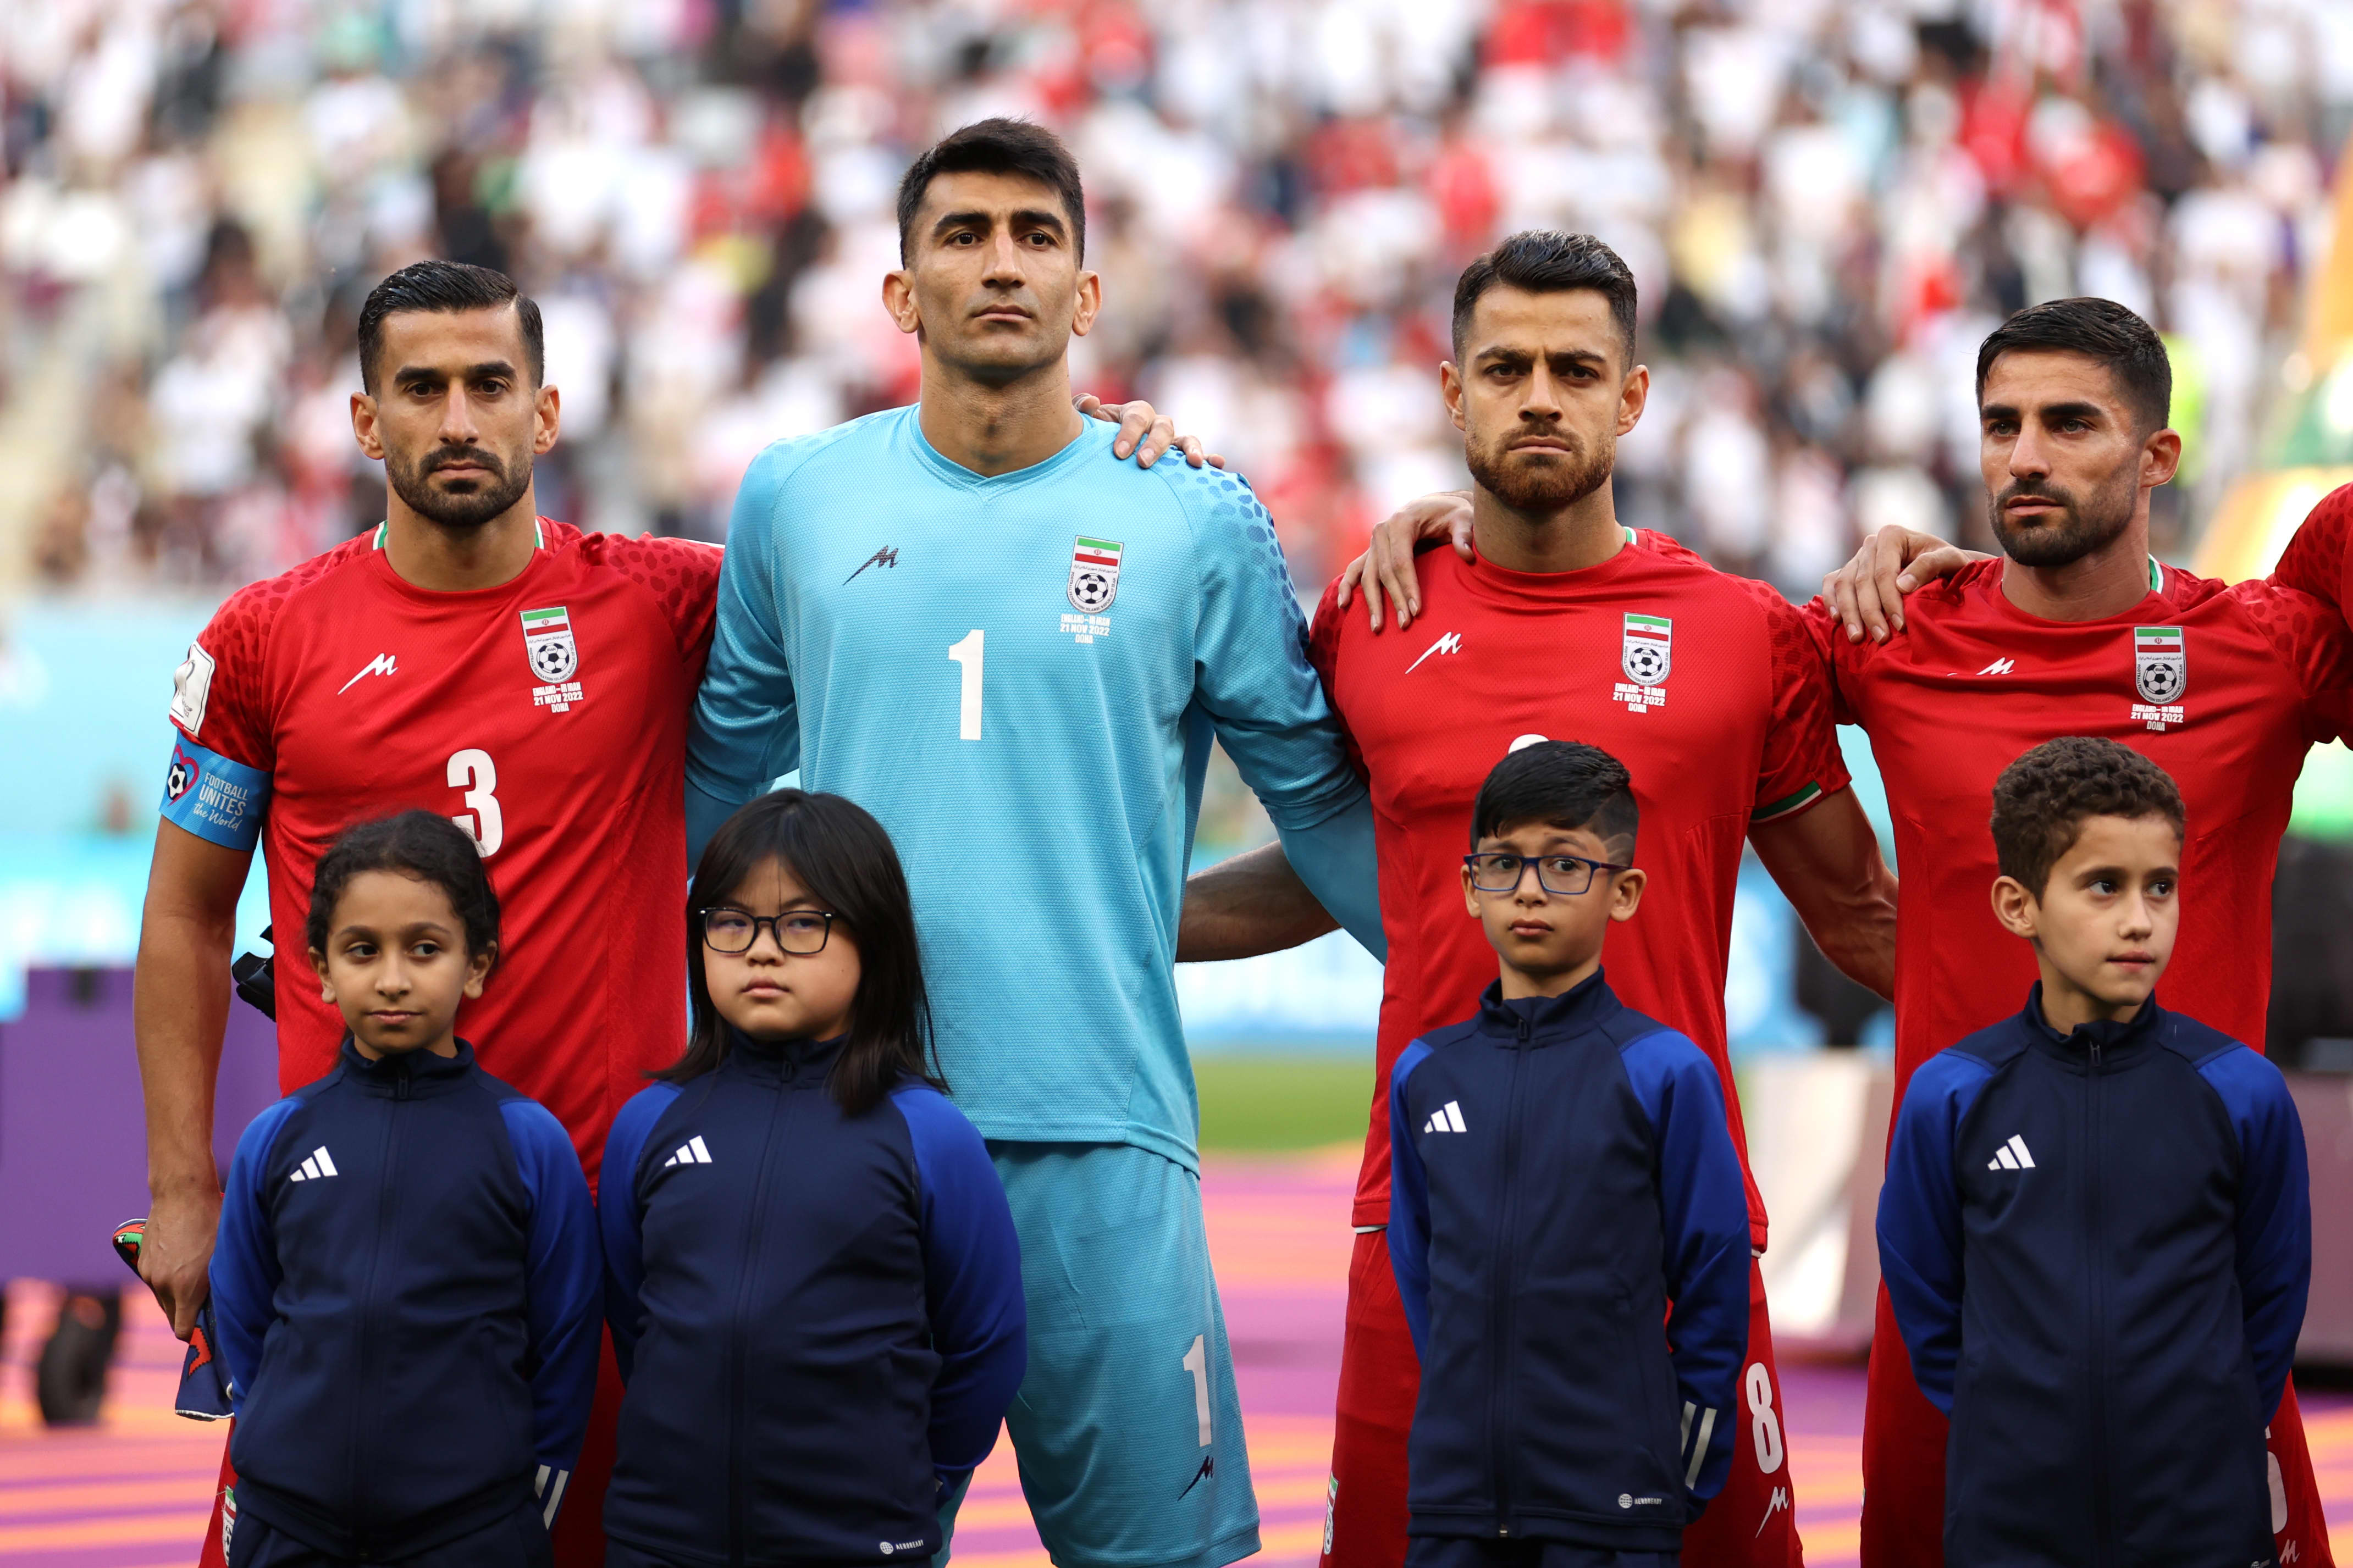 Iran soccer team silent during national anthem at its first World Cup game